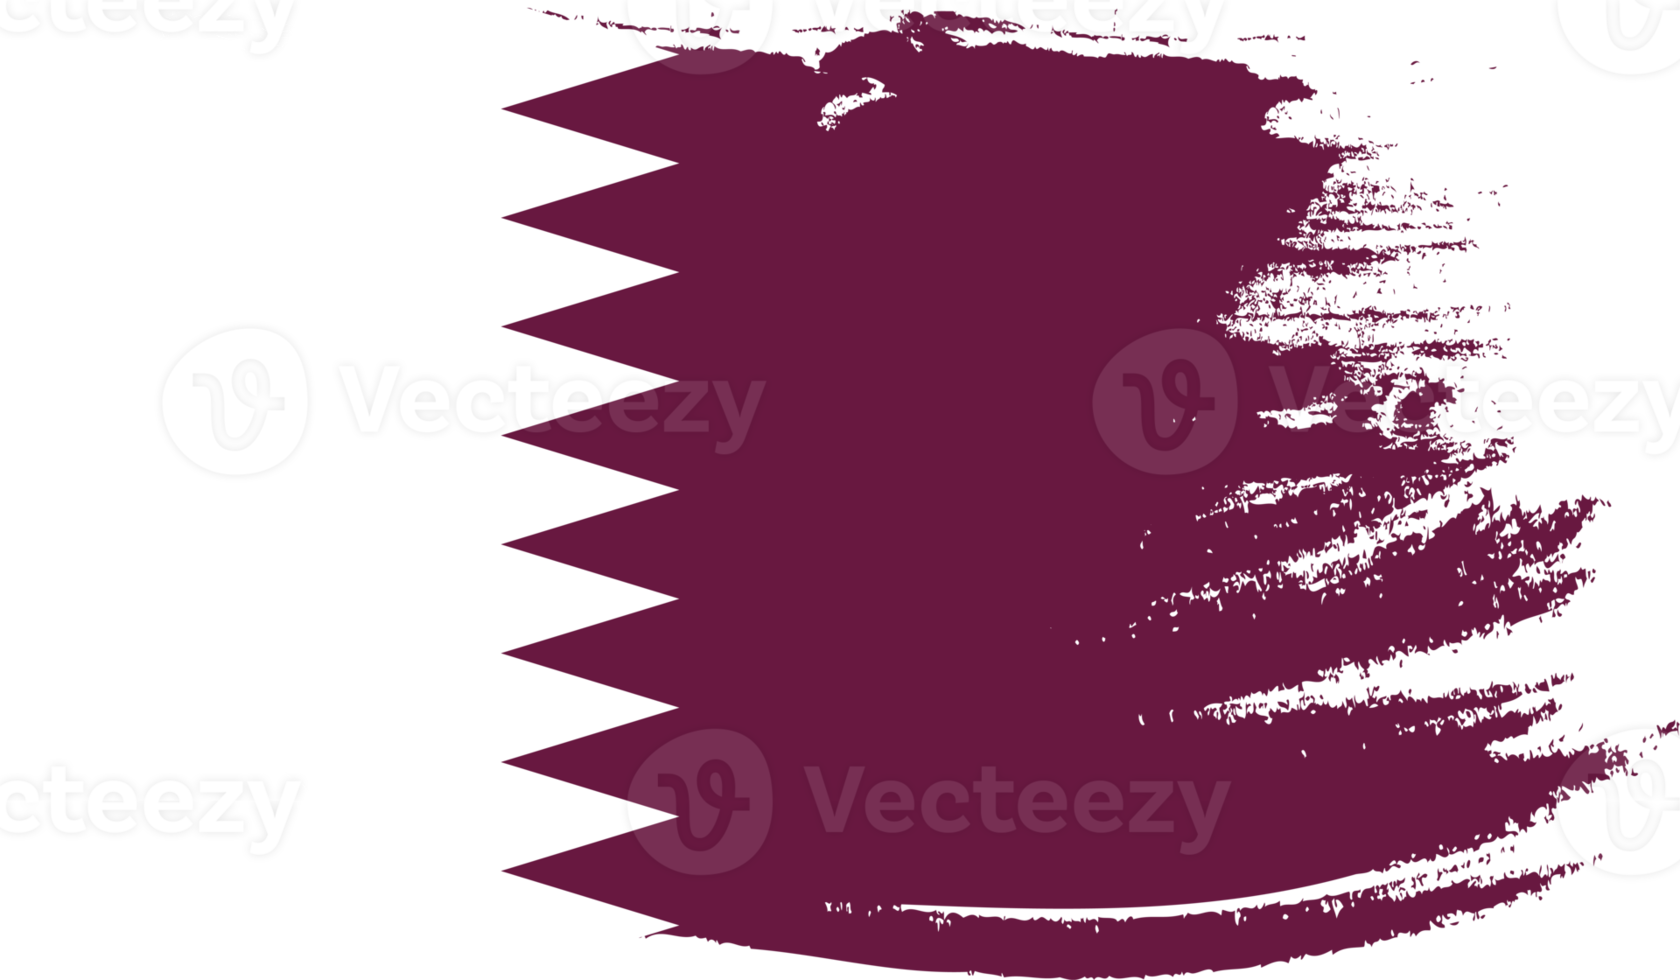 Qatar flag with grunge texture png